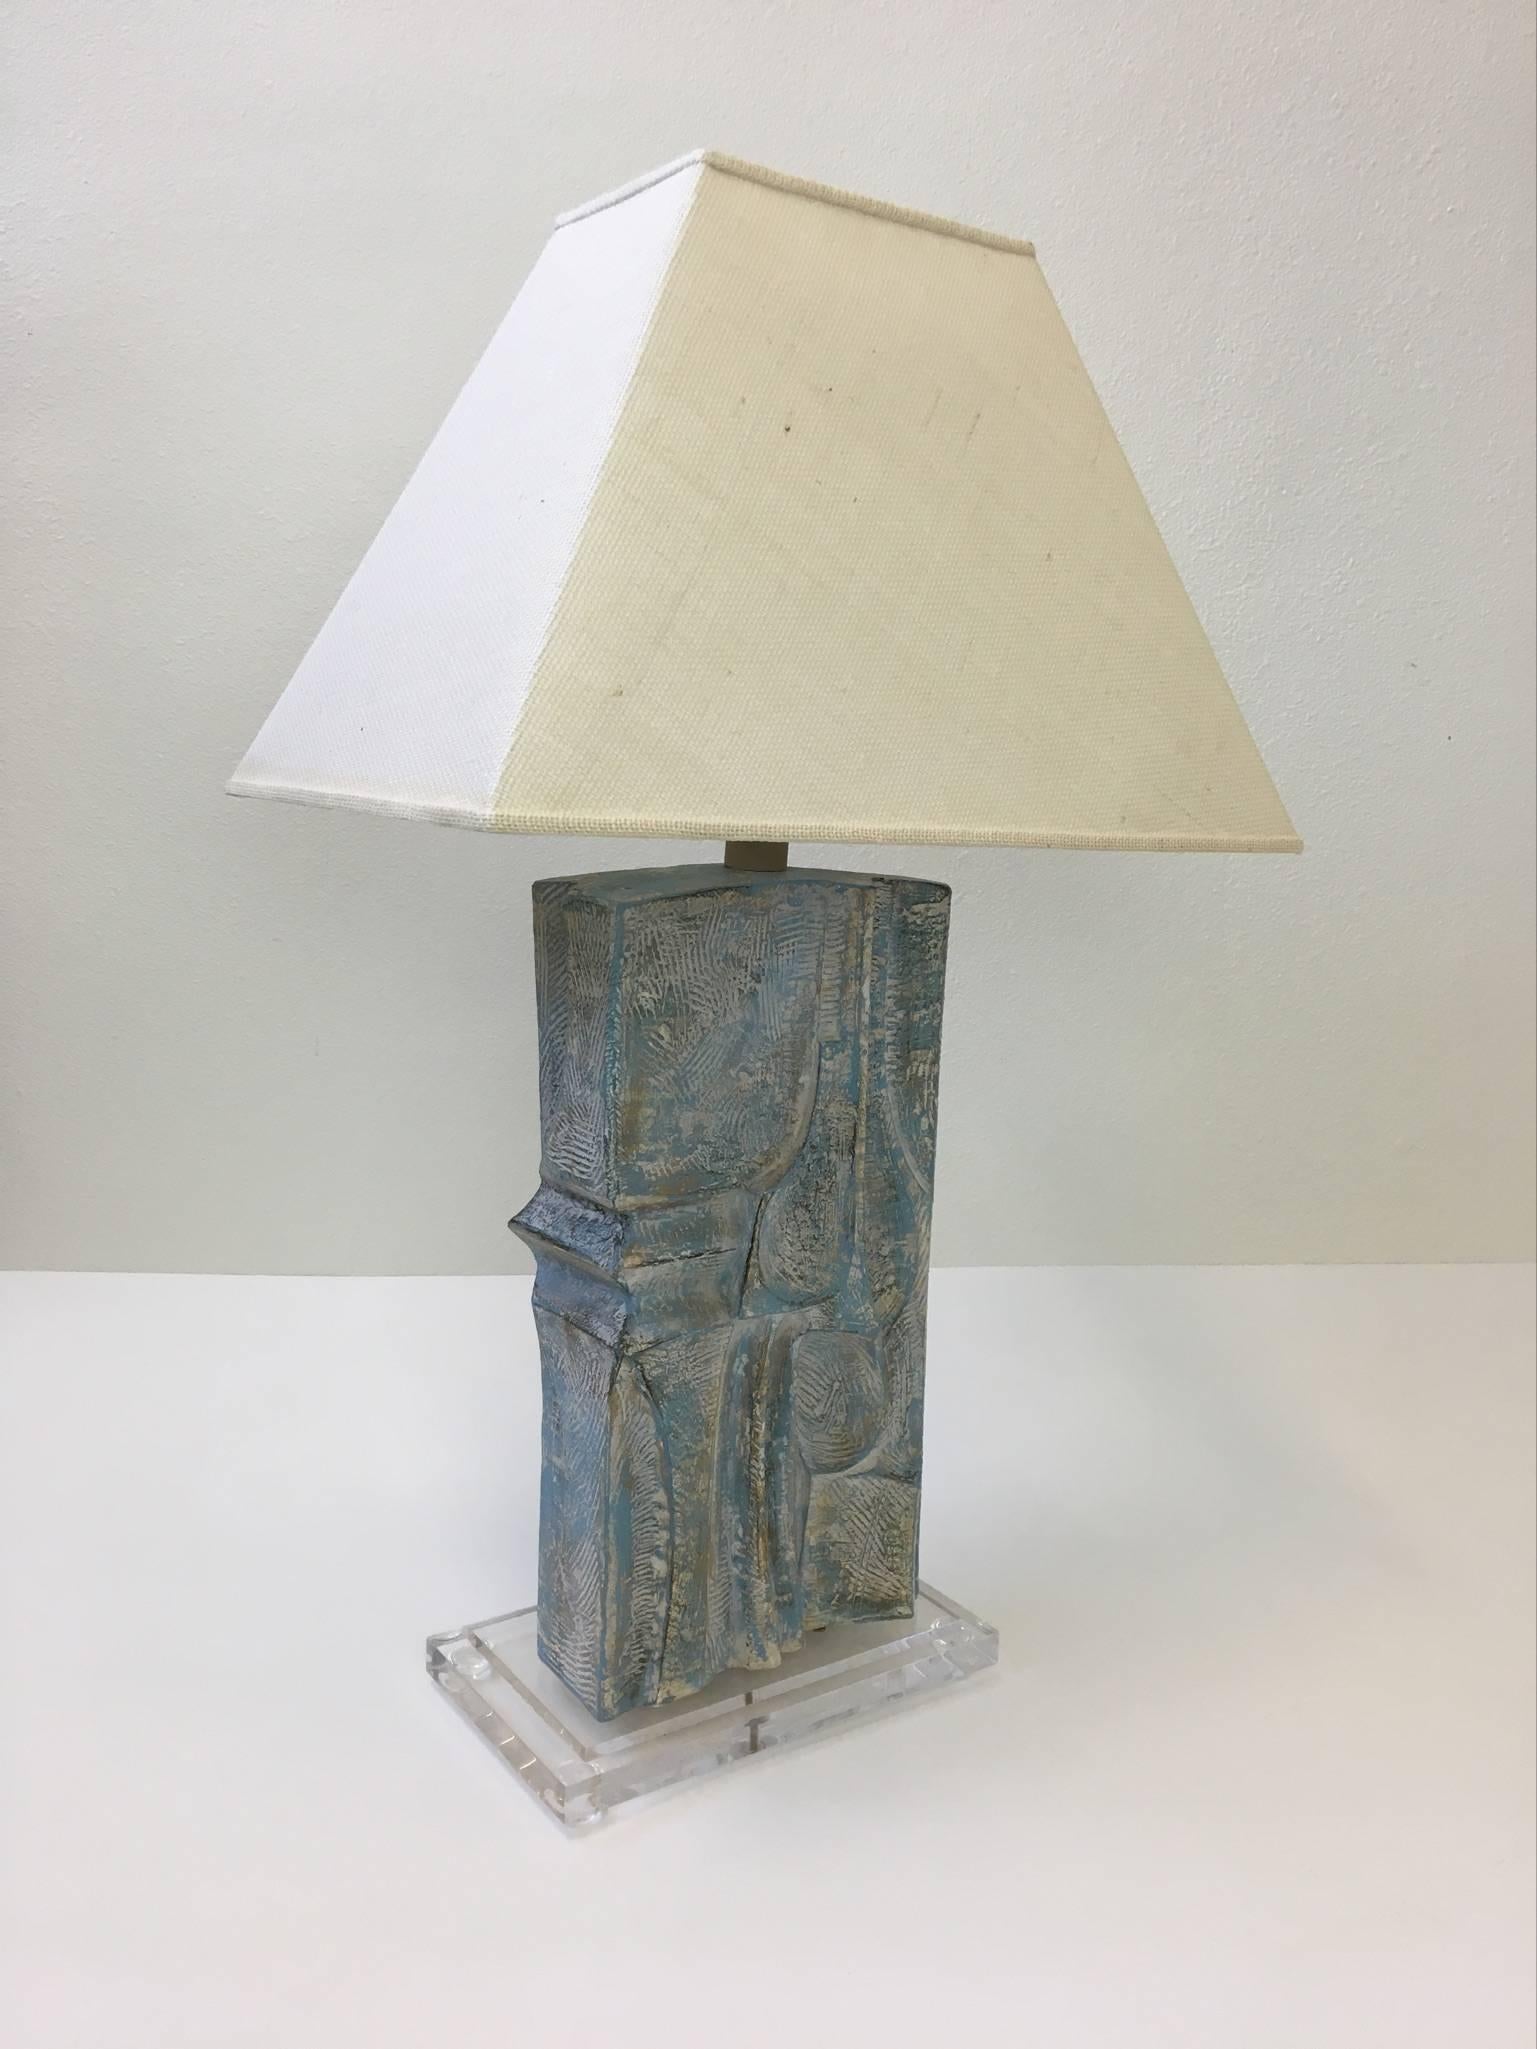 A sculptural Brutalist table lamp designed by Casual Lamps in 1987.
The lamp is cast plaster with had painted finish and acrylic base. 
Newly rewired with new nickel hardware and new off-white burlap shade. 

Dim: 22.25" wide, 15"